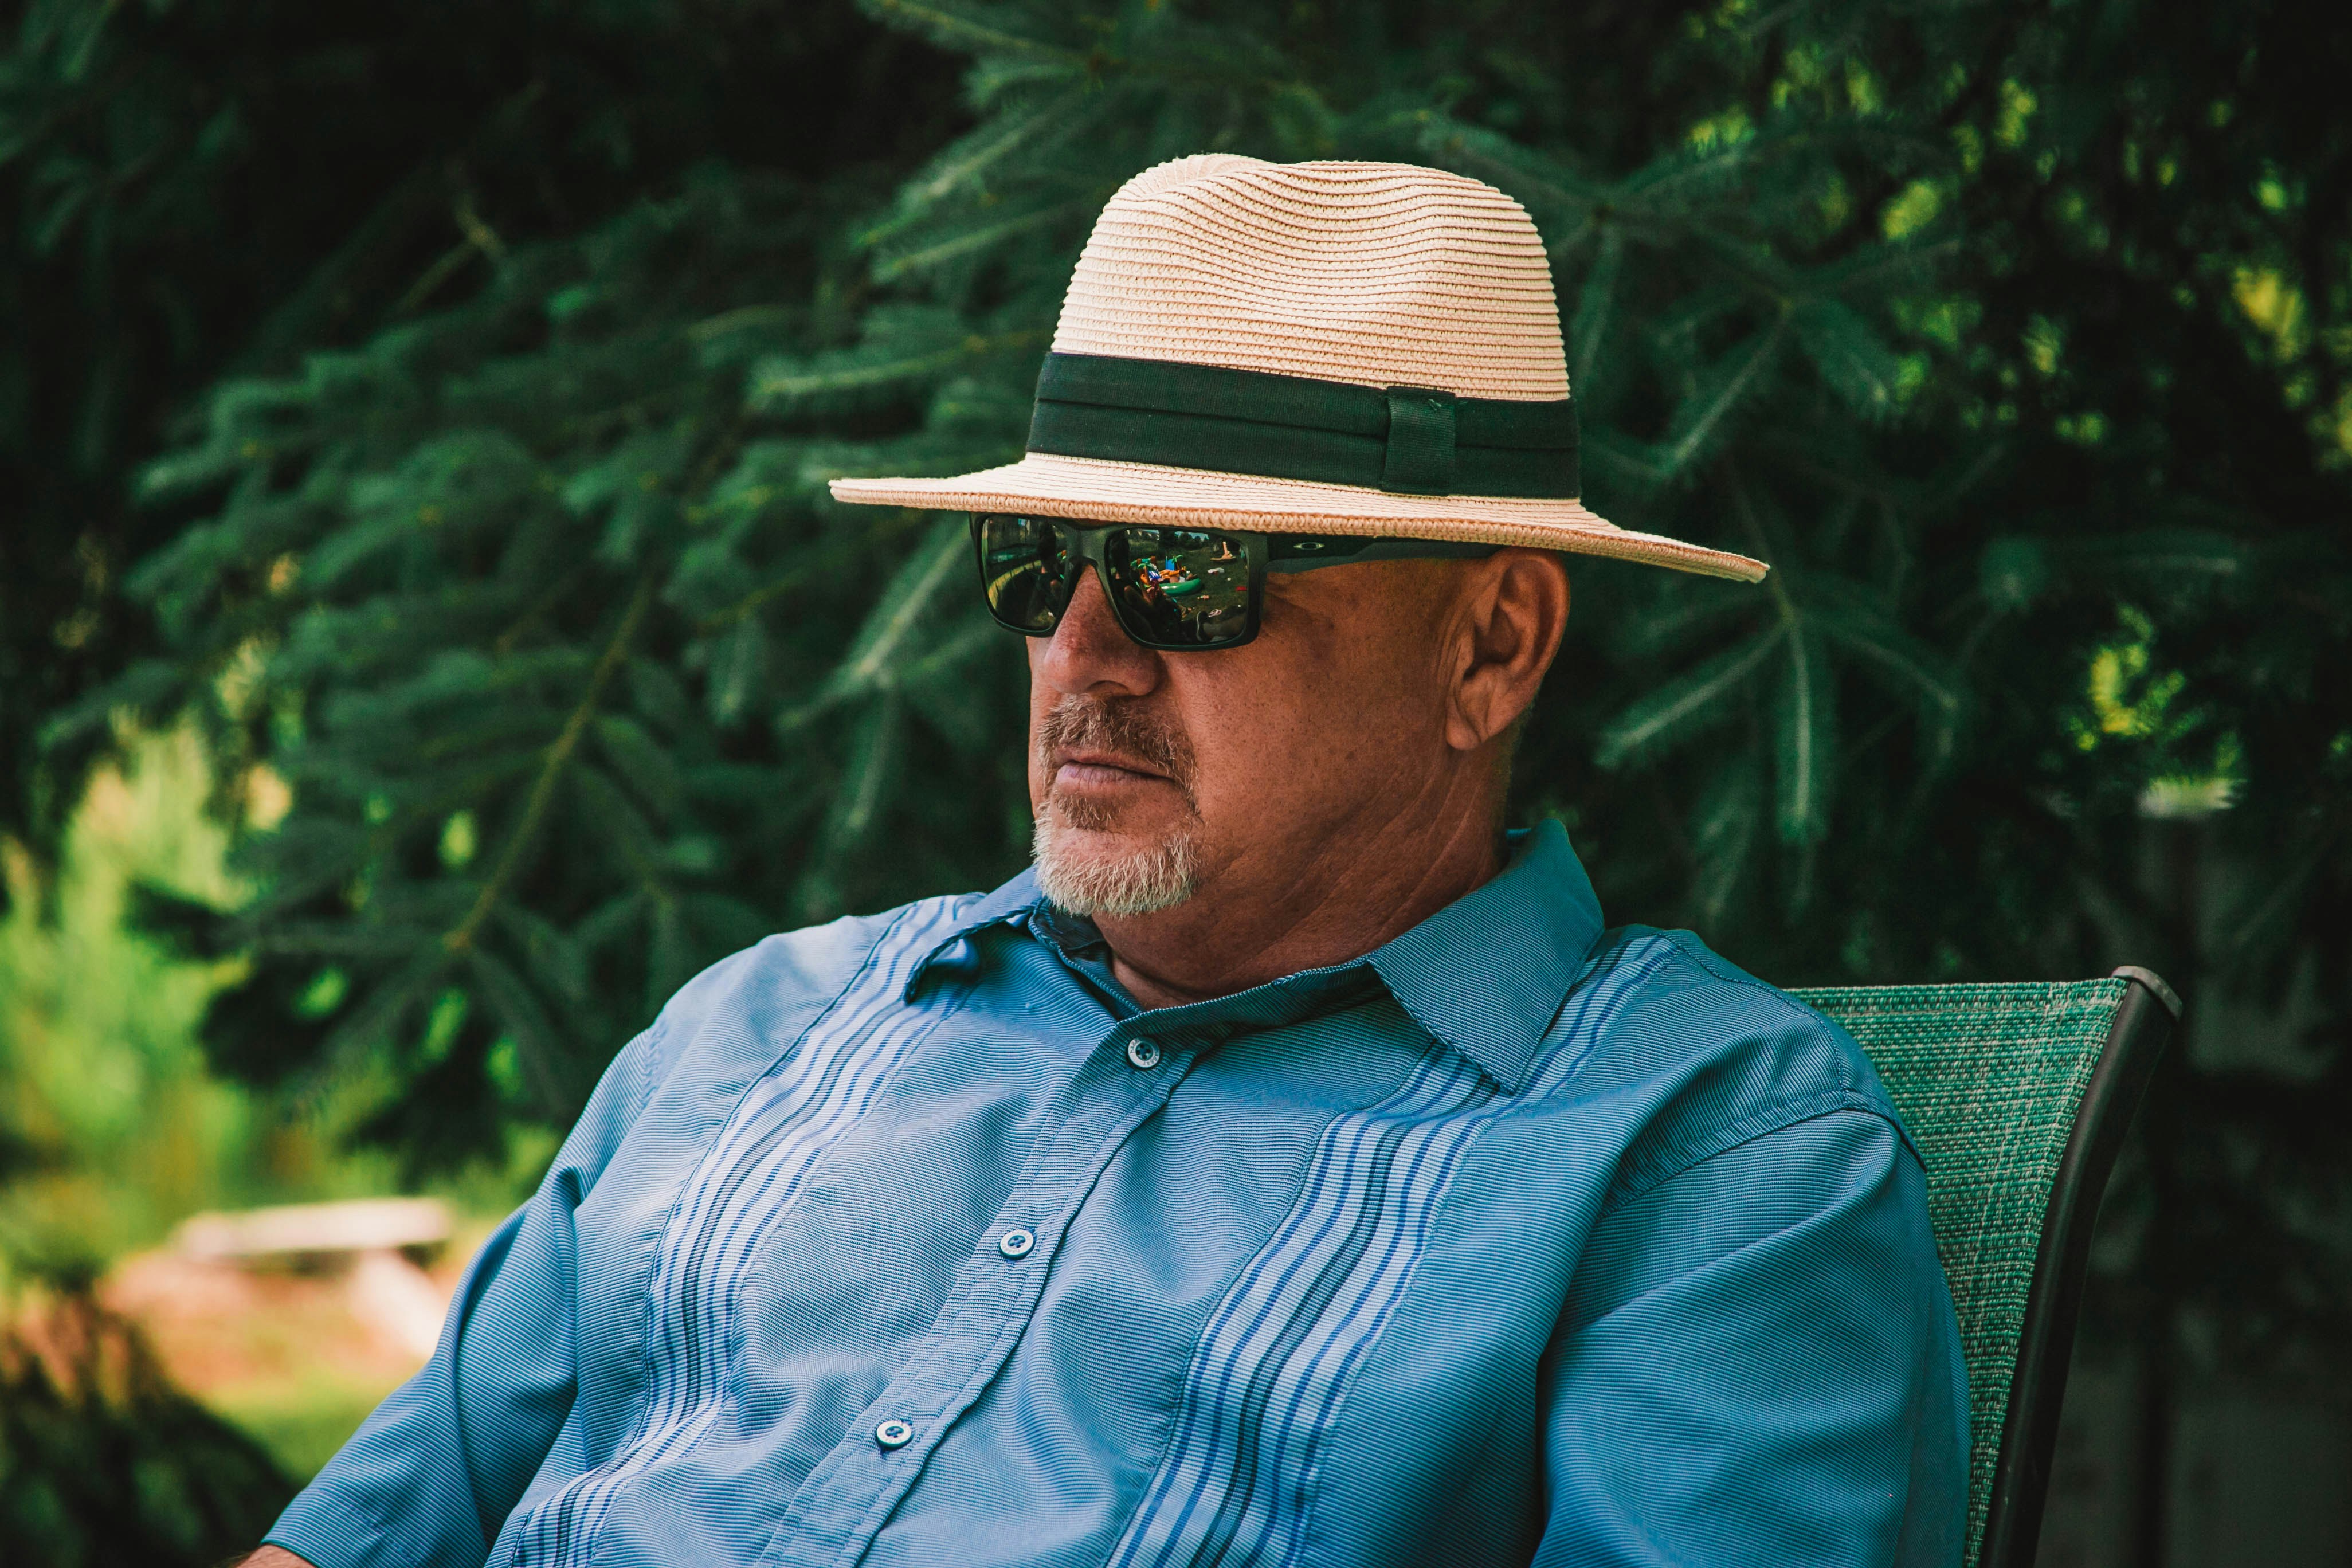 A man is dressed in a blue shirt, sunglasses, and a Panama hat